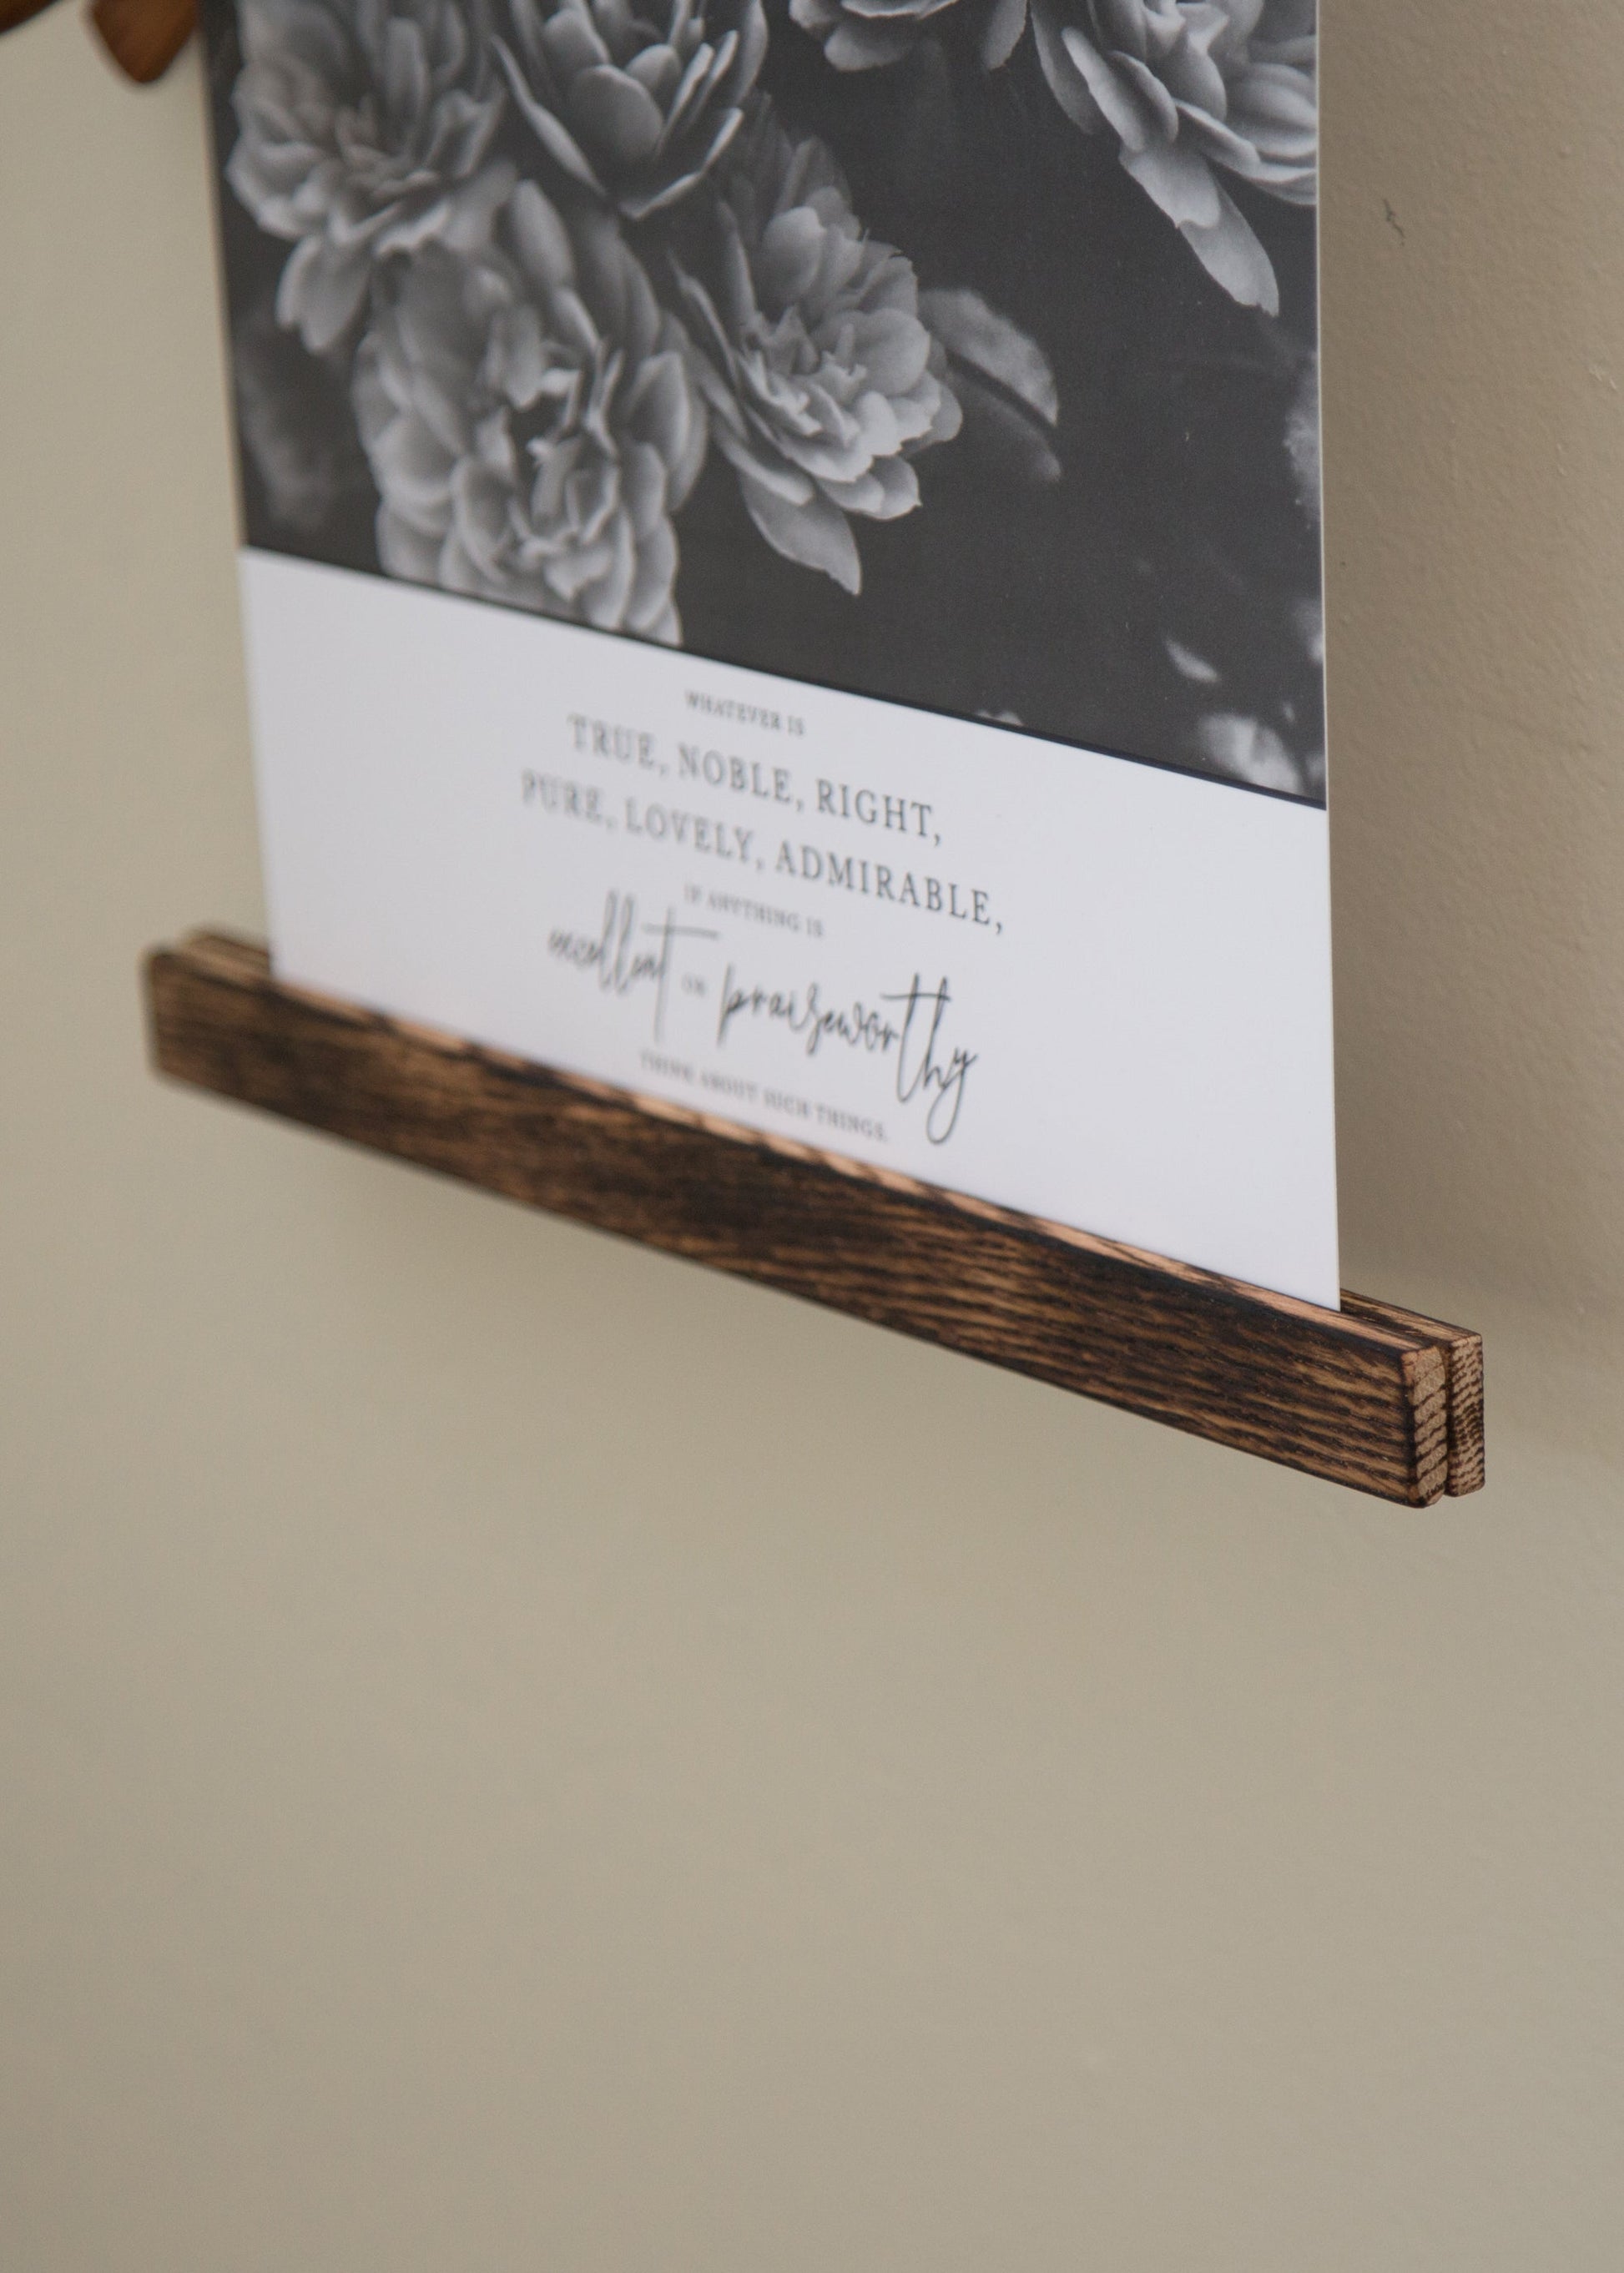 Inspirational Photo Hanger Collection - FINAL SALE Home & Lifestyle